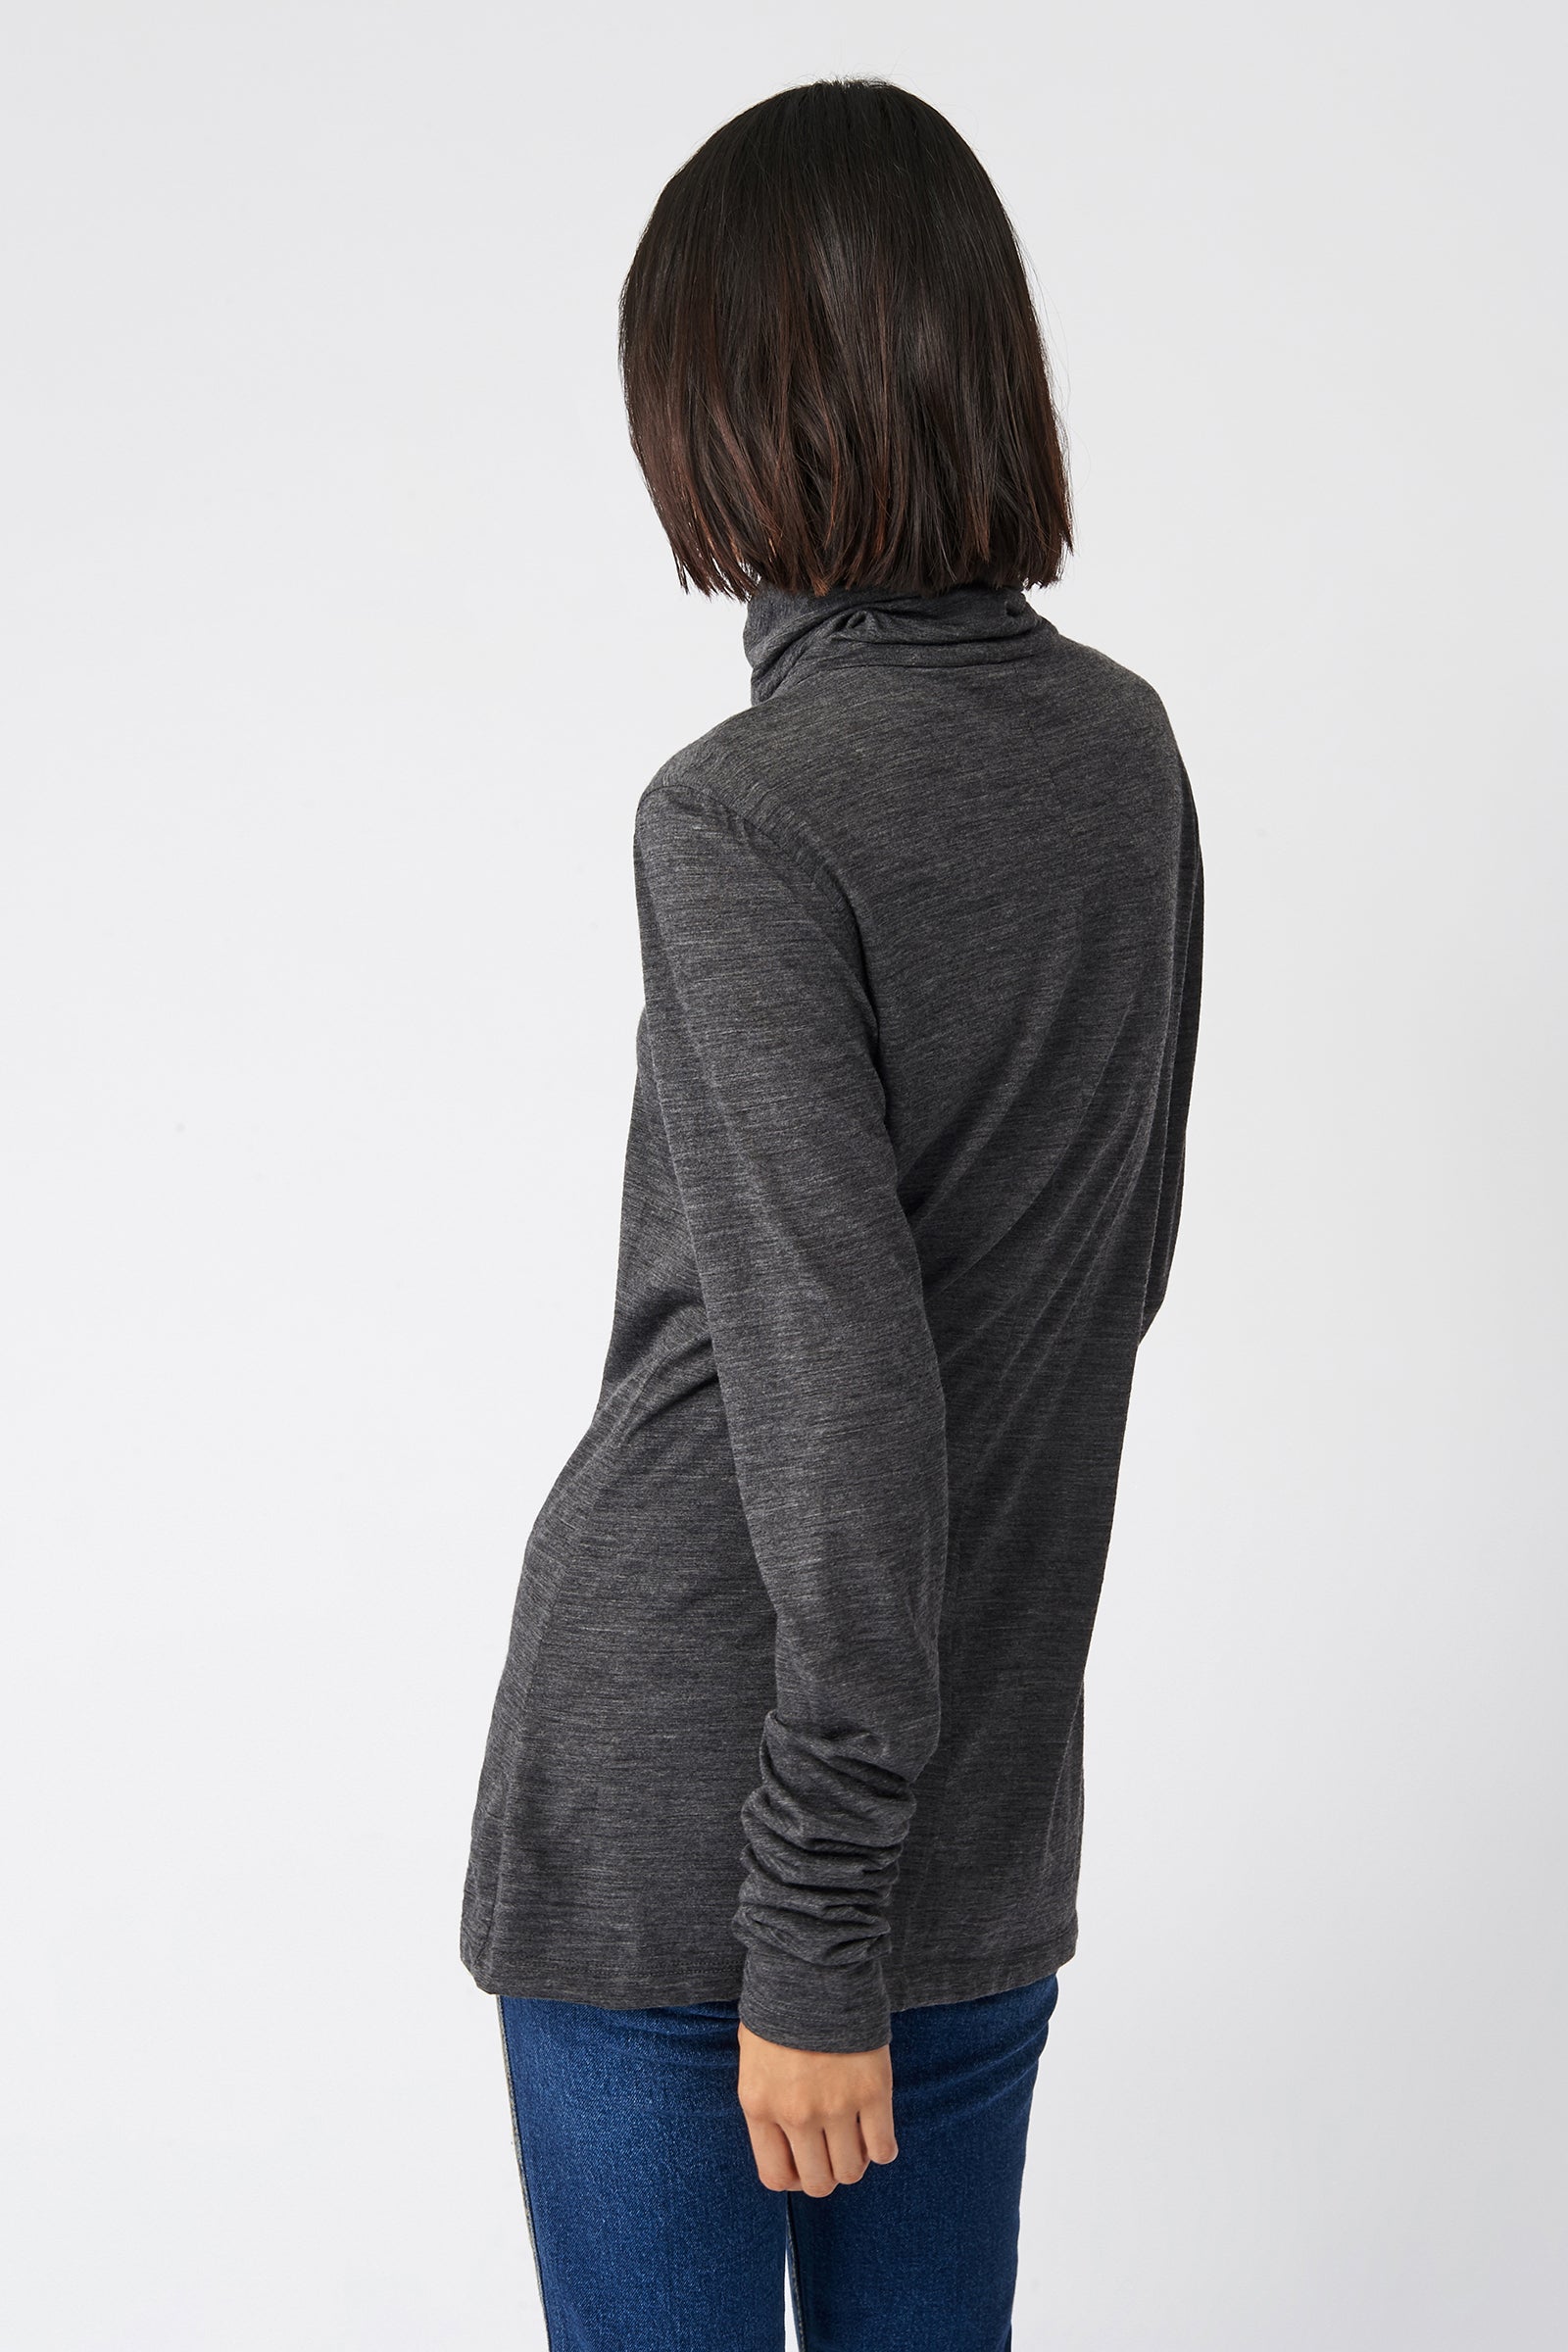 Kal Rieman Fitted Turtleneck in Charcoal on Model Back View